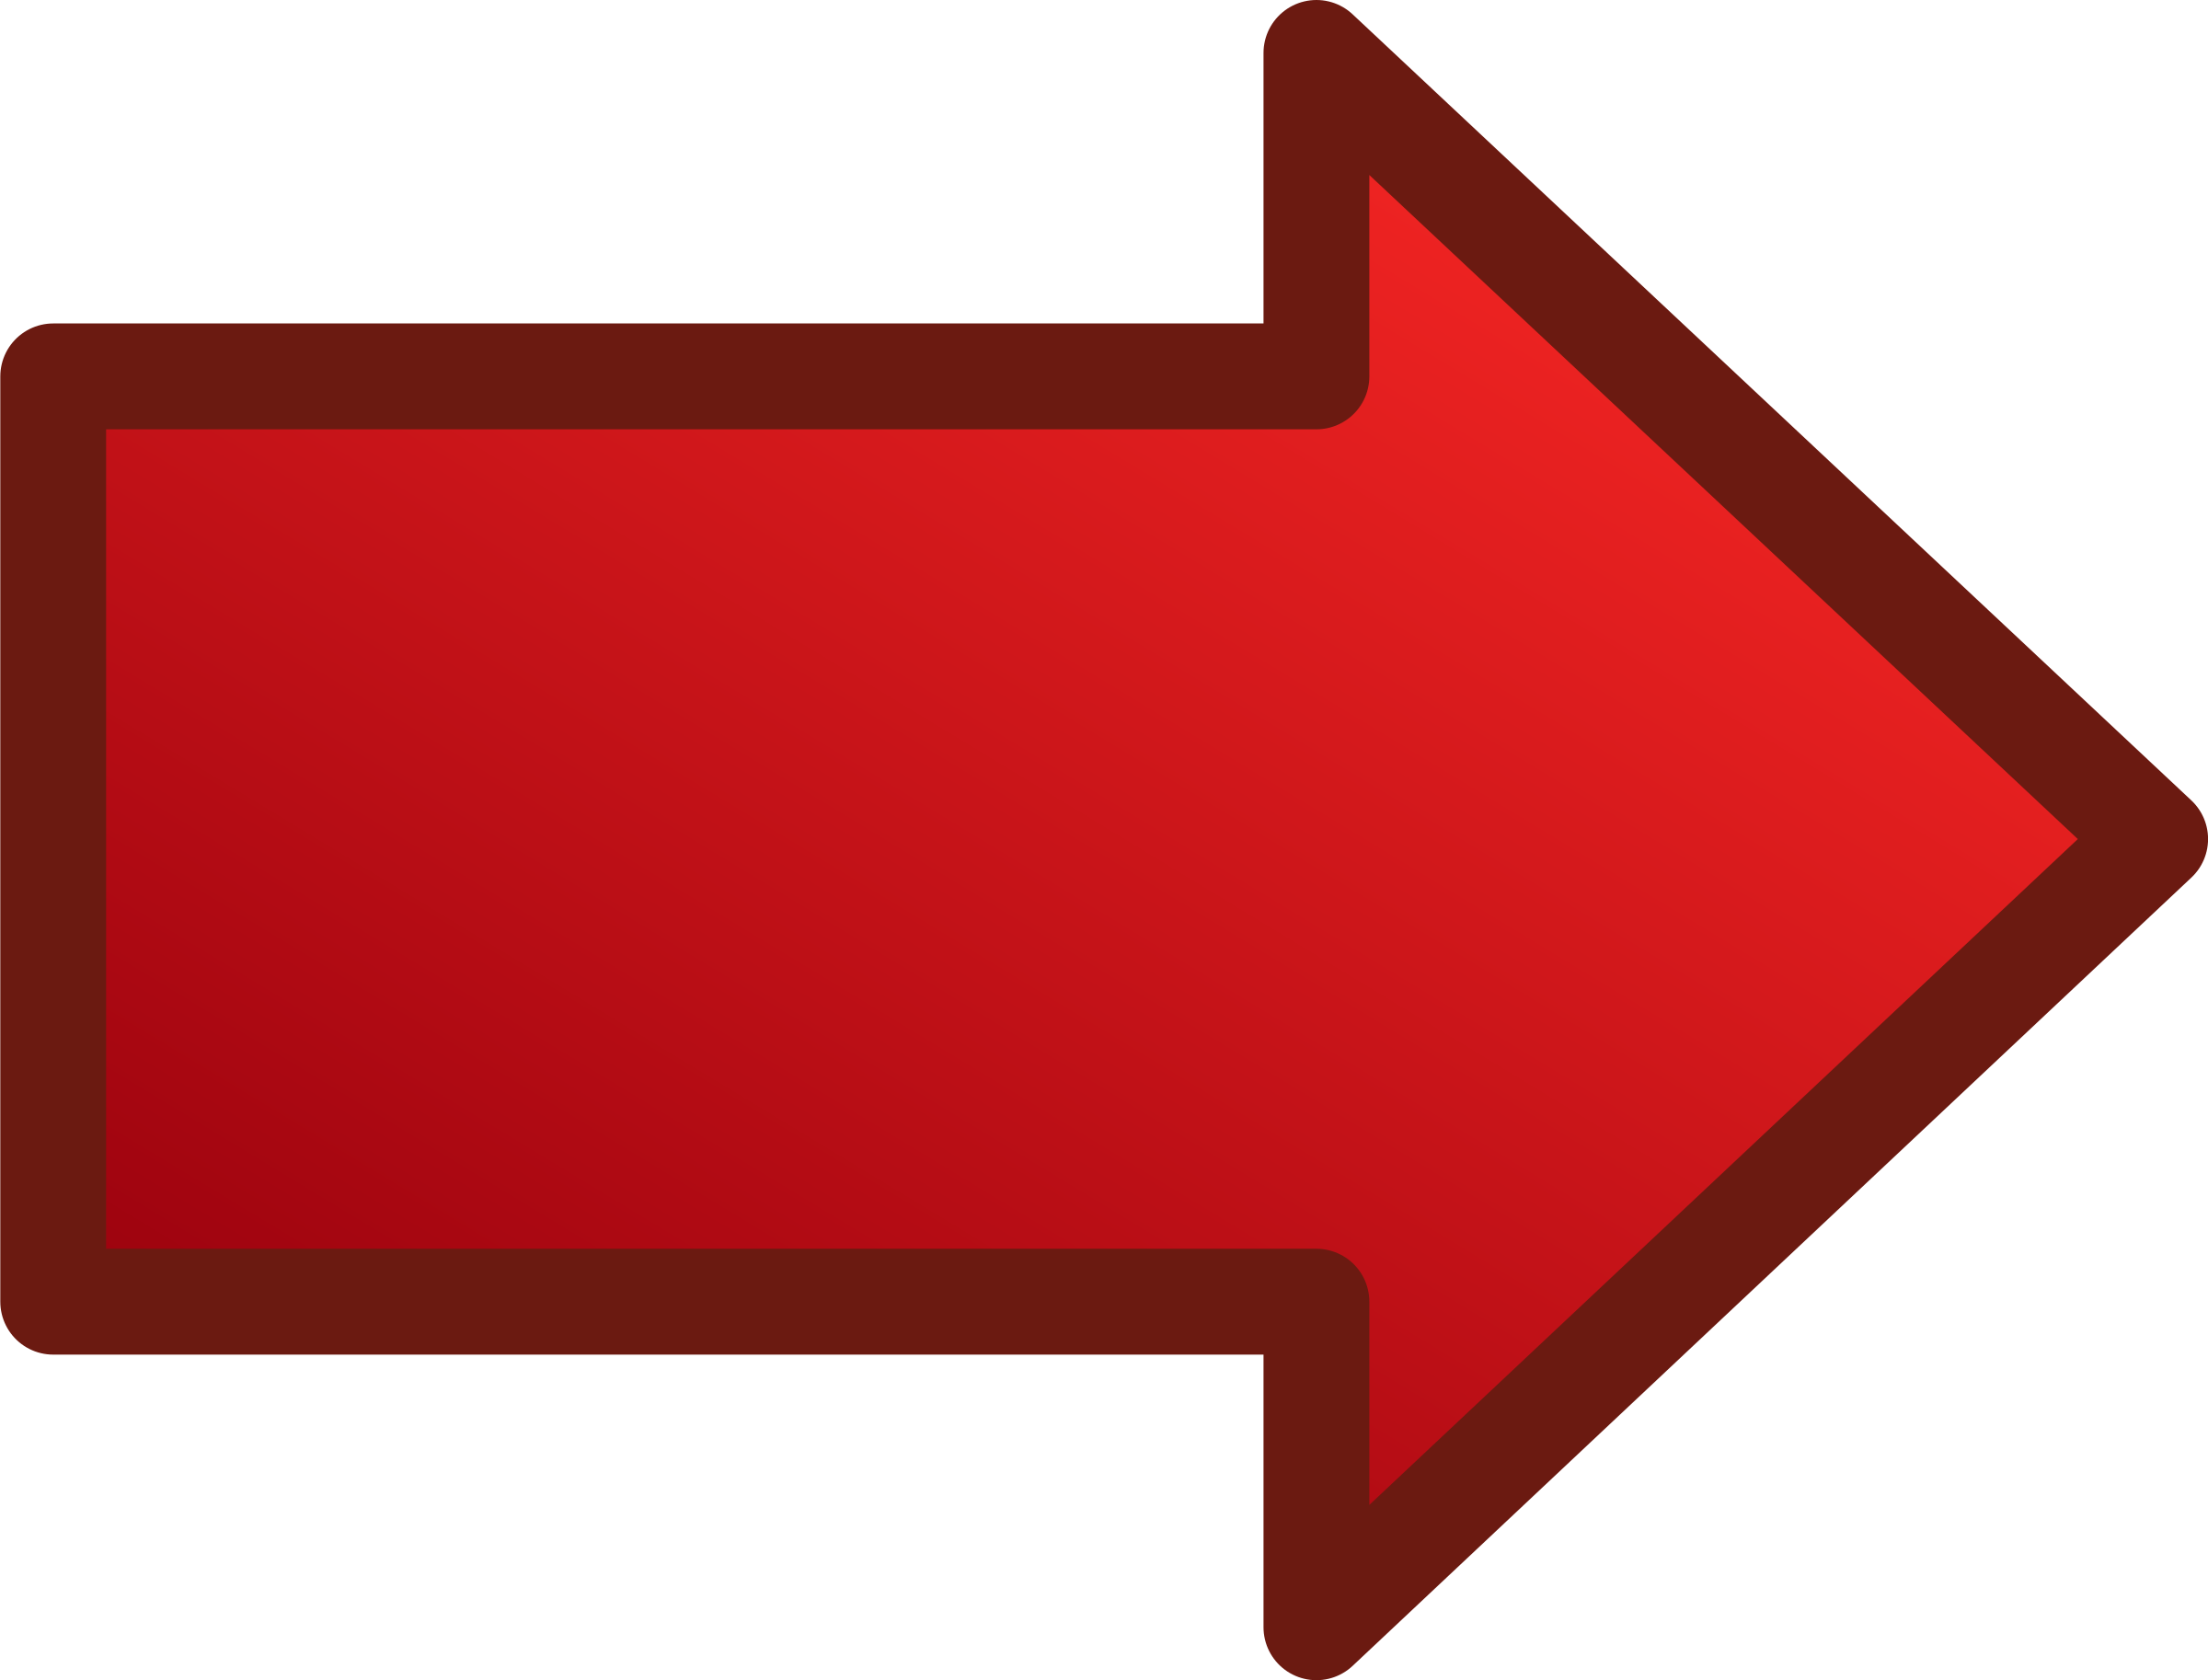 Red Arrow Background PNG Image